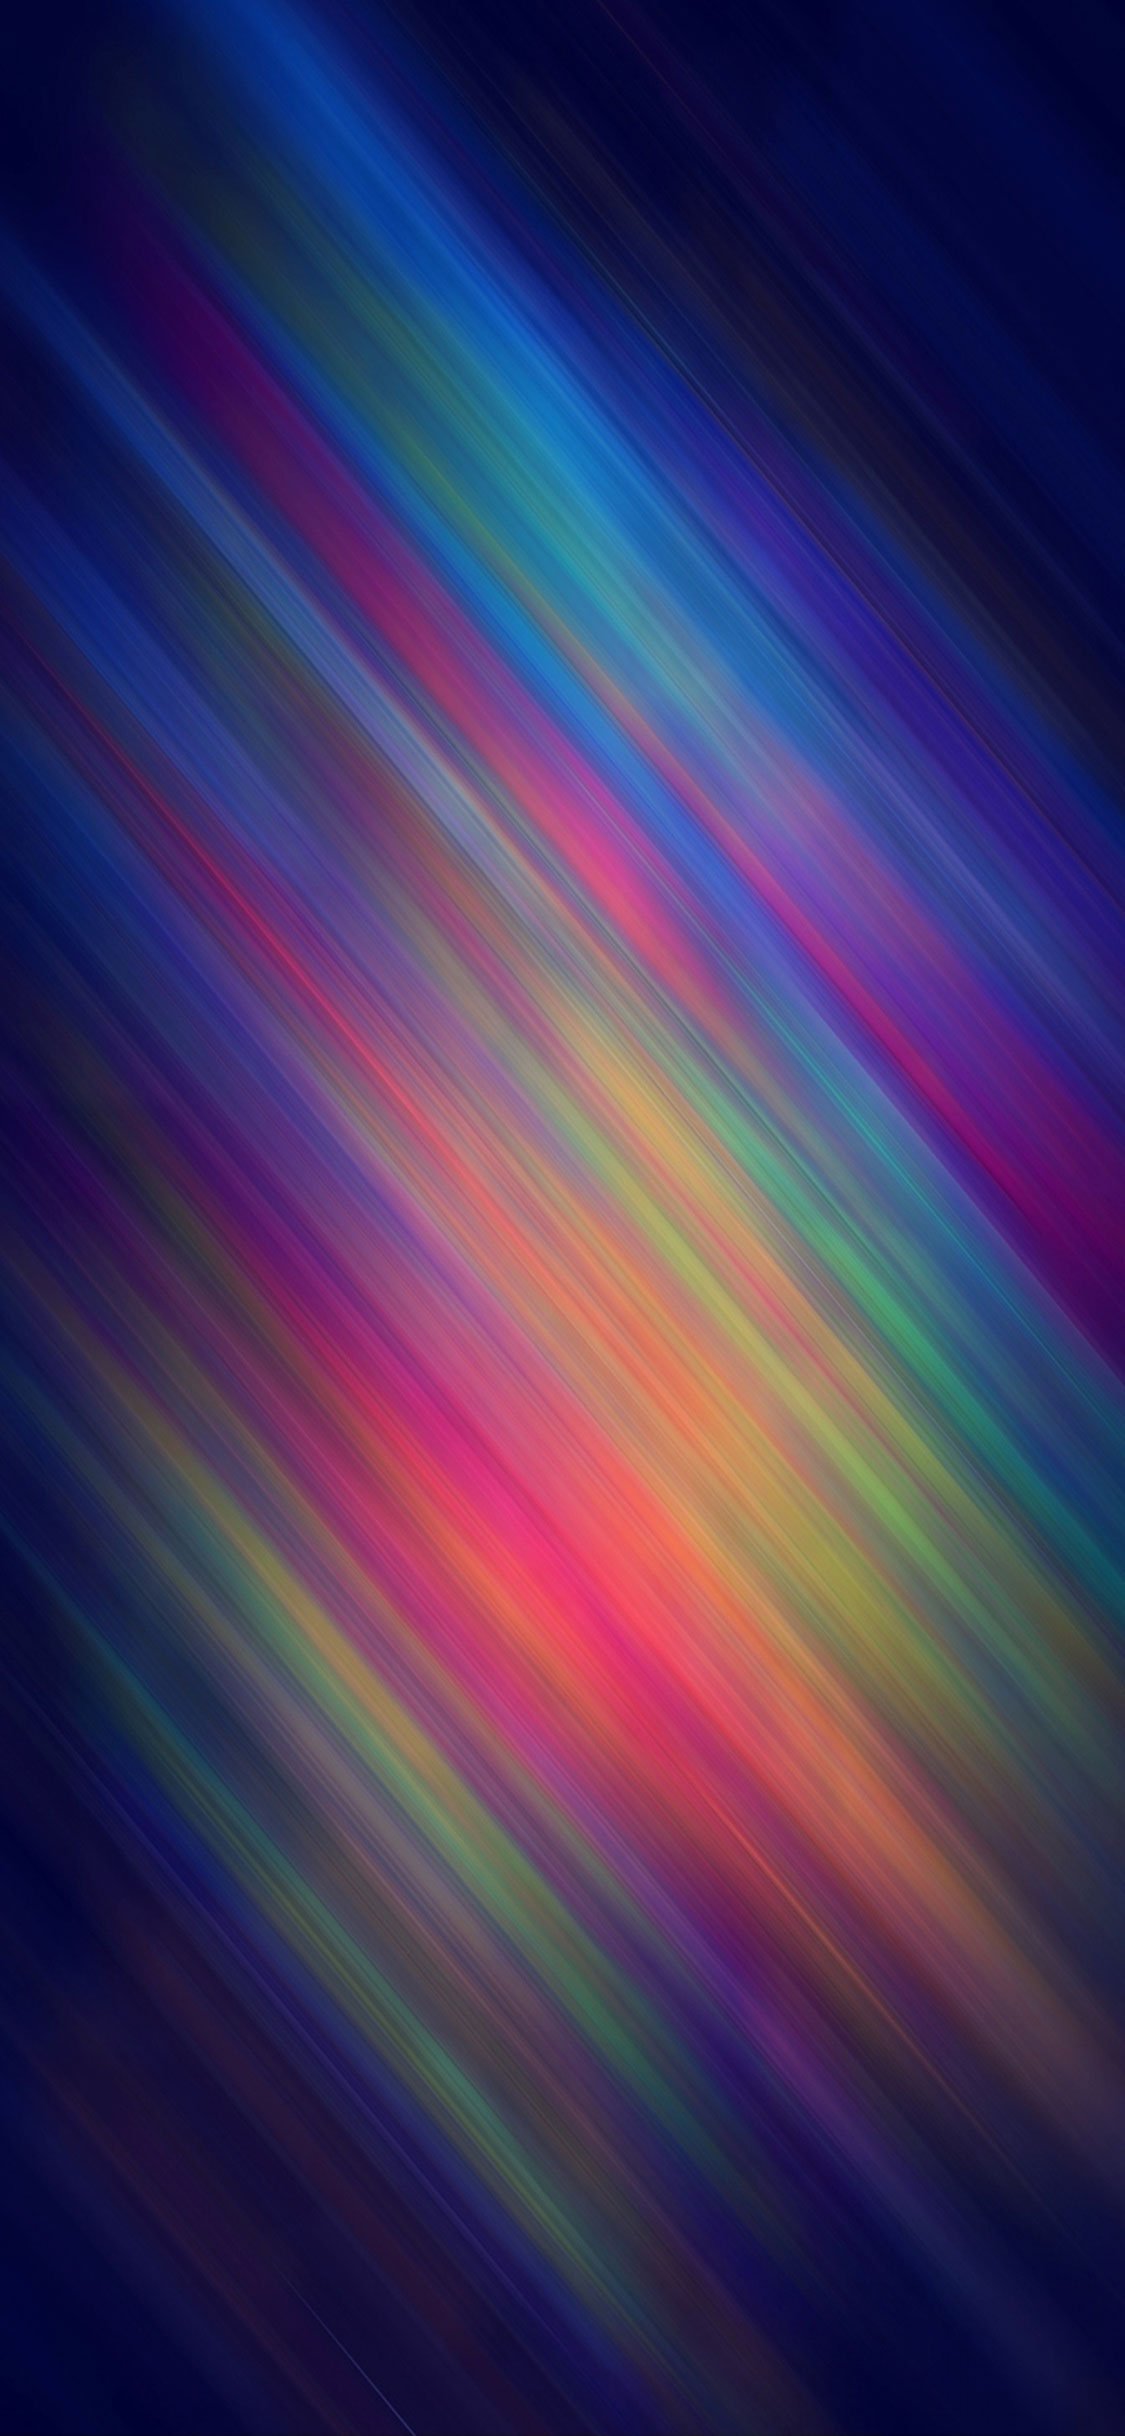 30  New Cool iPhone X Wallpapers \u0026 Backgrounds to freshen up your screen